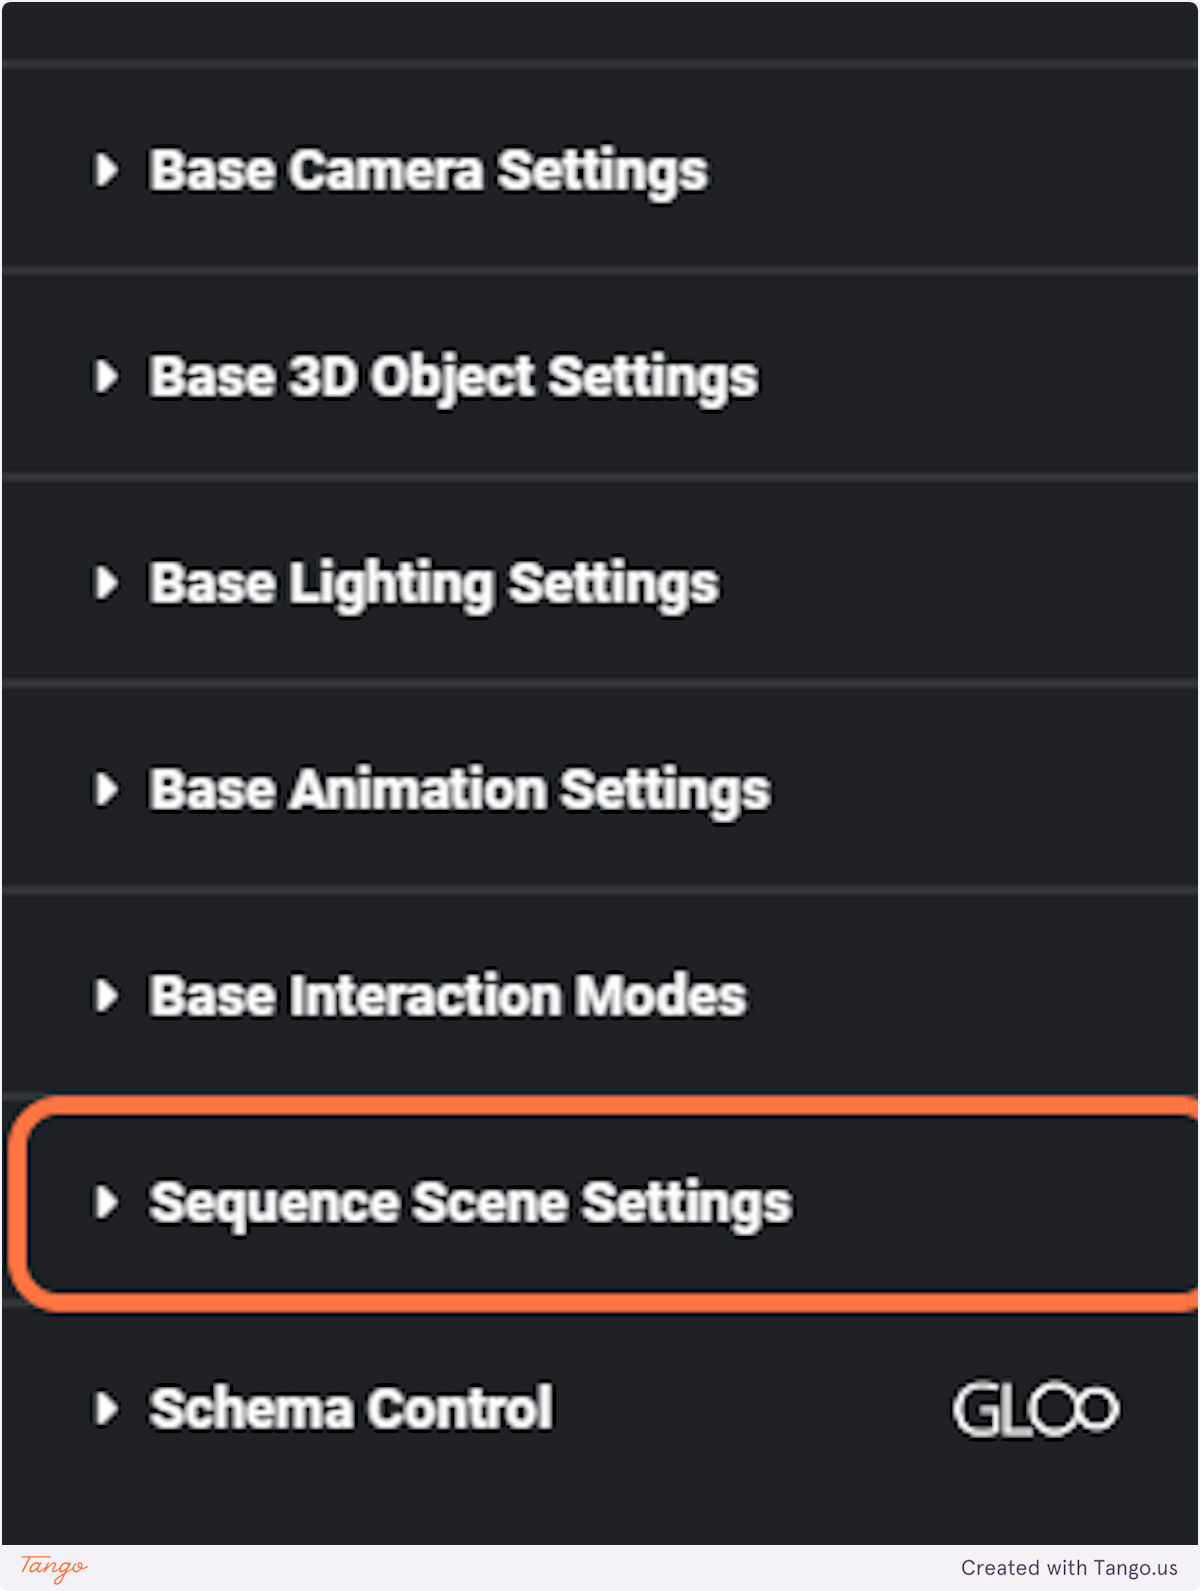 Click on sequence scene settings